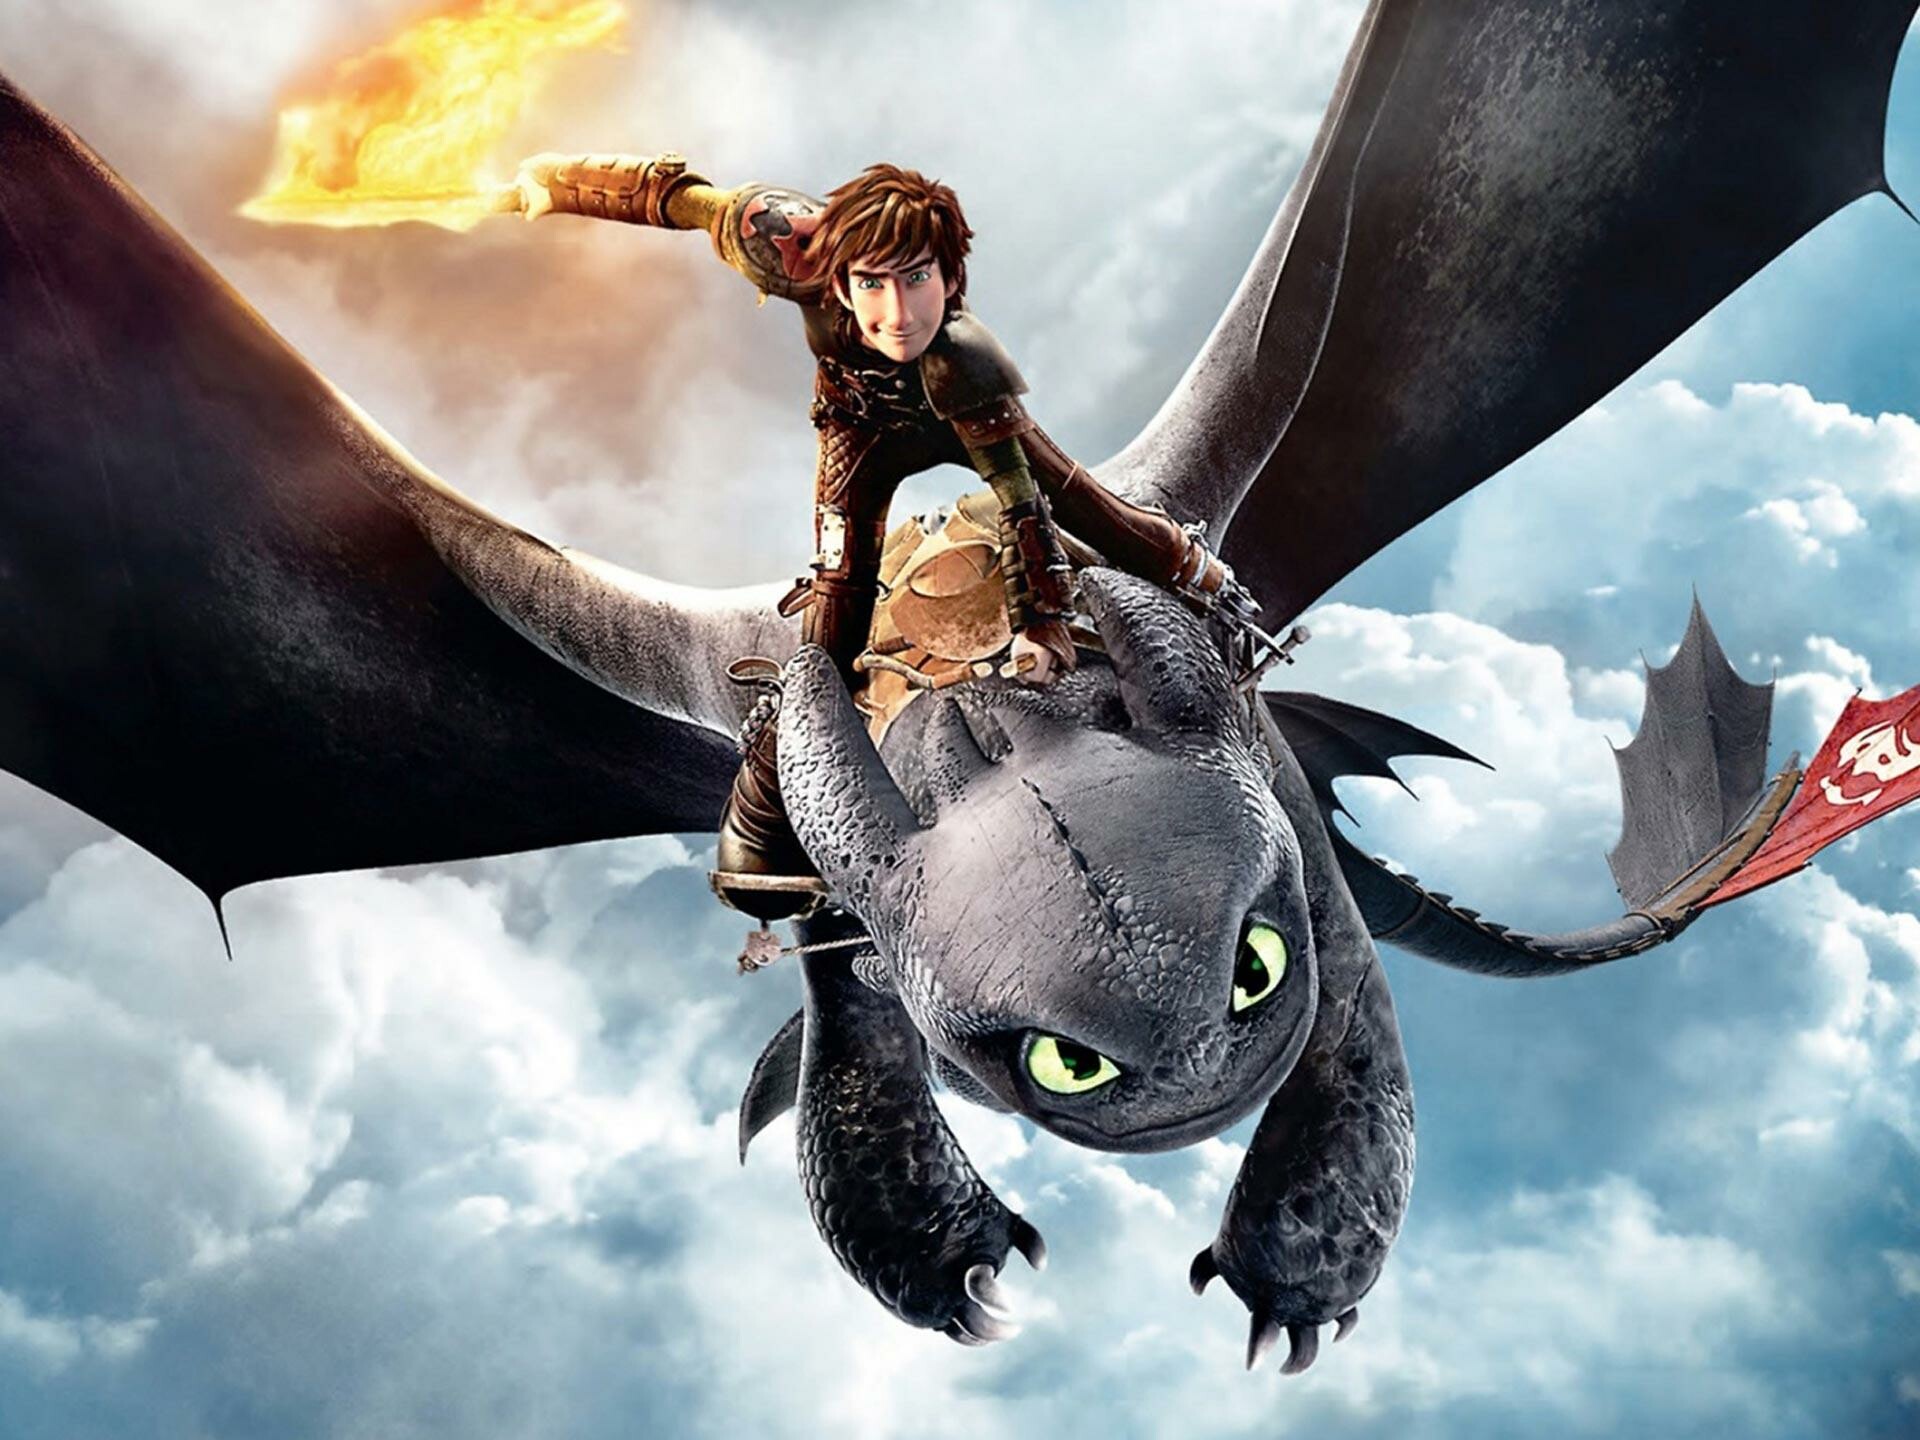 How to Train Your Dragon: The second installment in the trilogy, Dragons, Toothless. 1920x1440 HD Wallpaper.